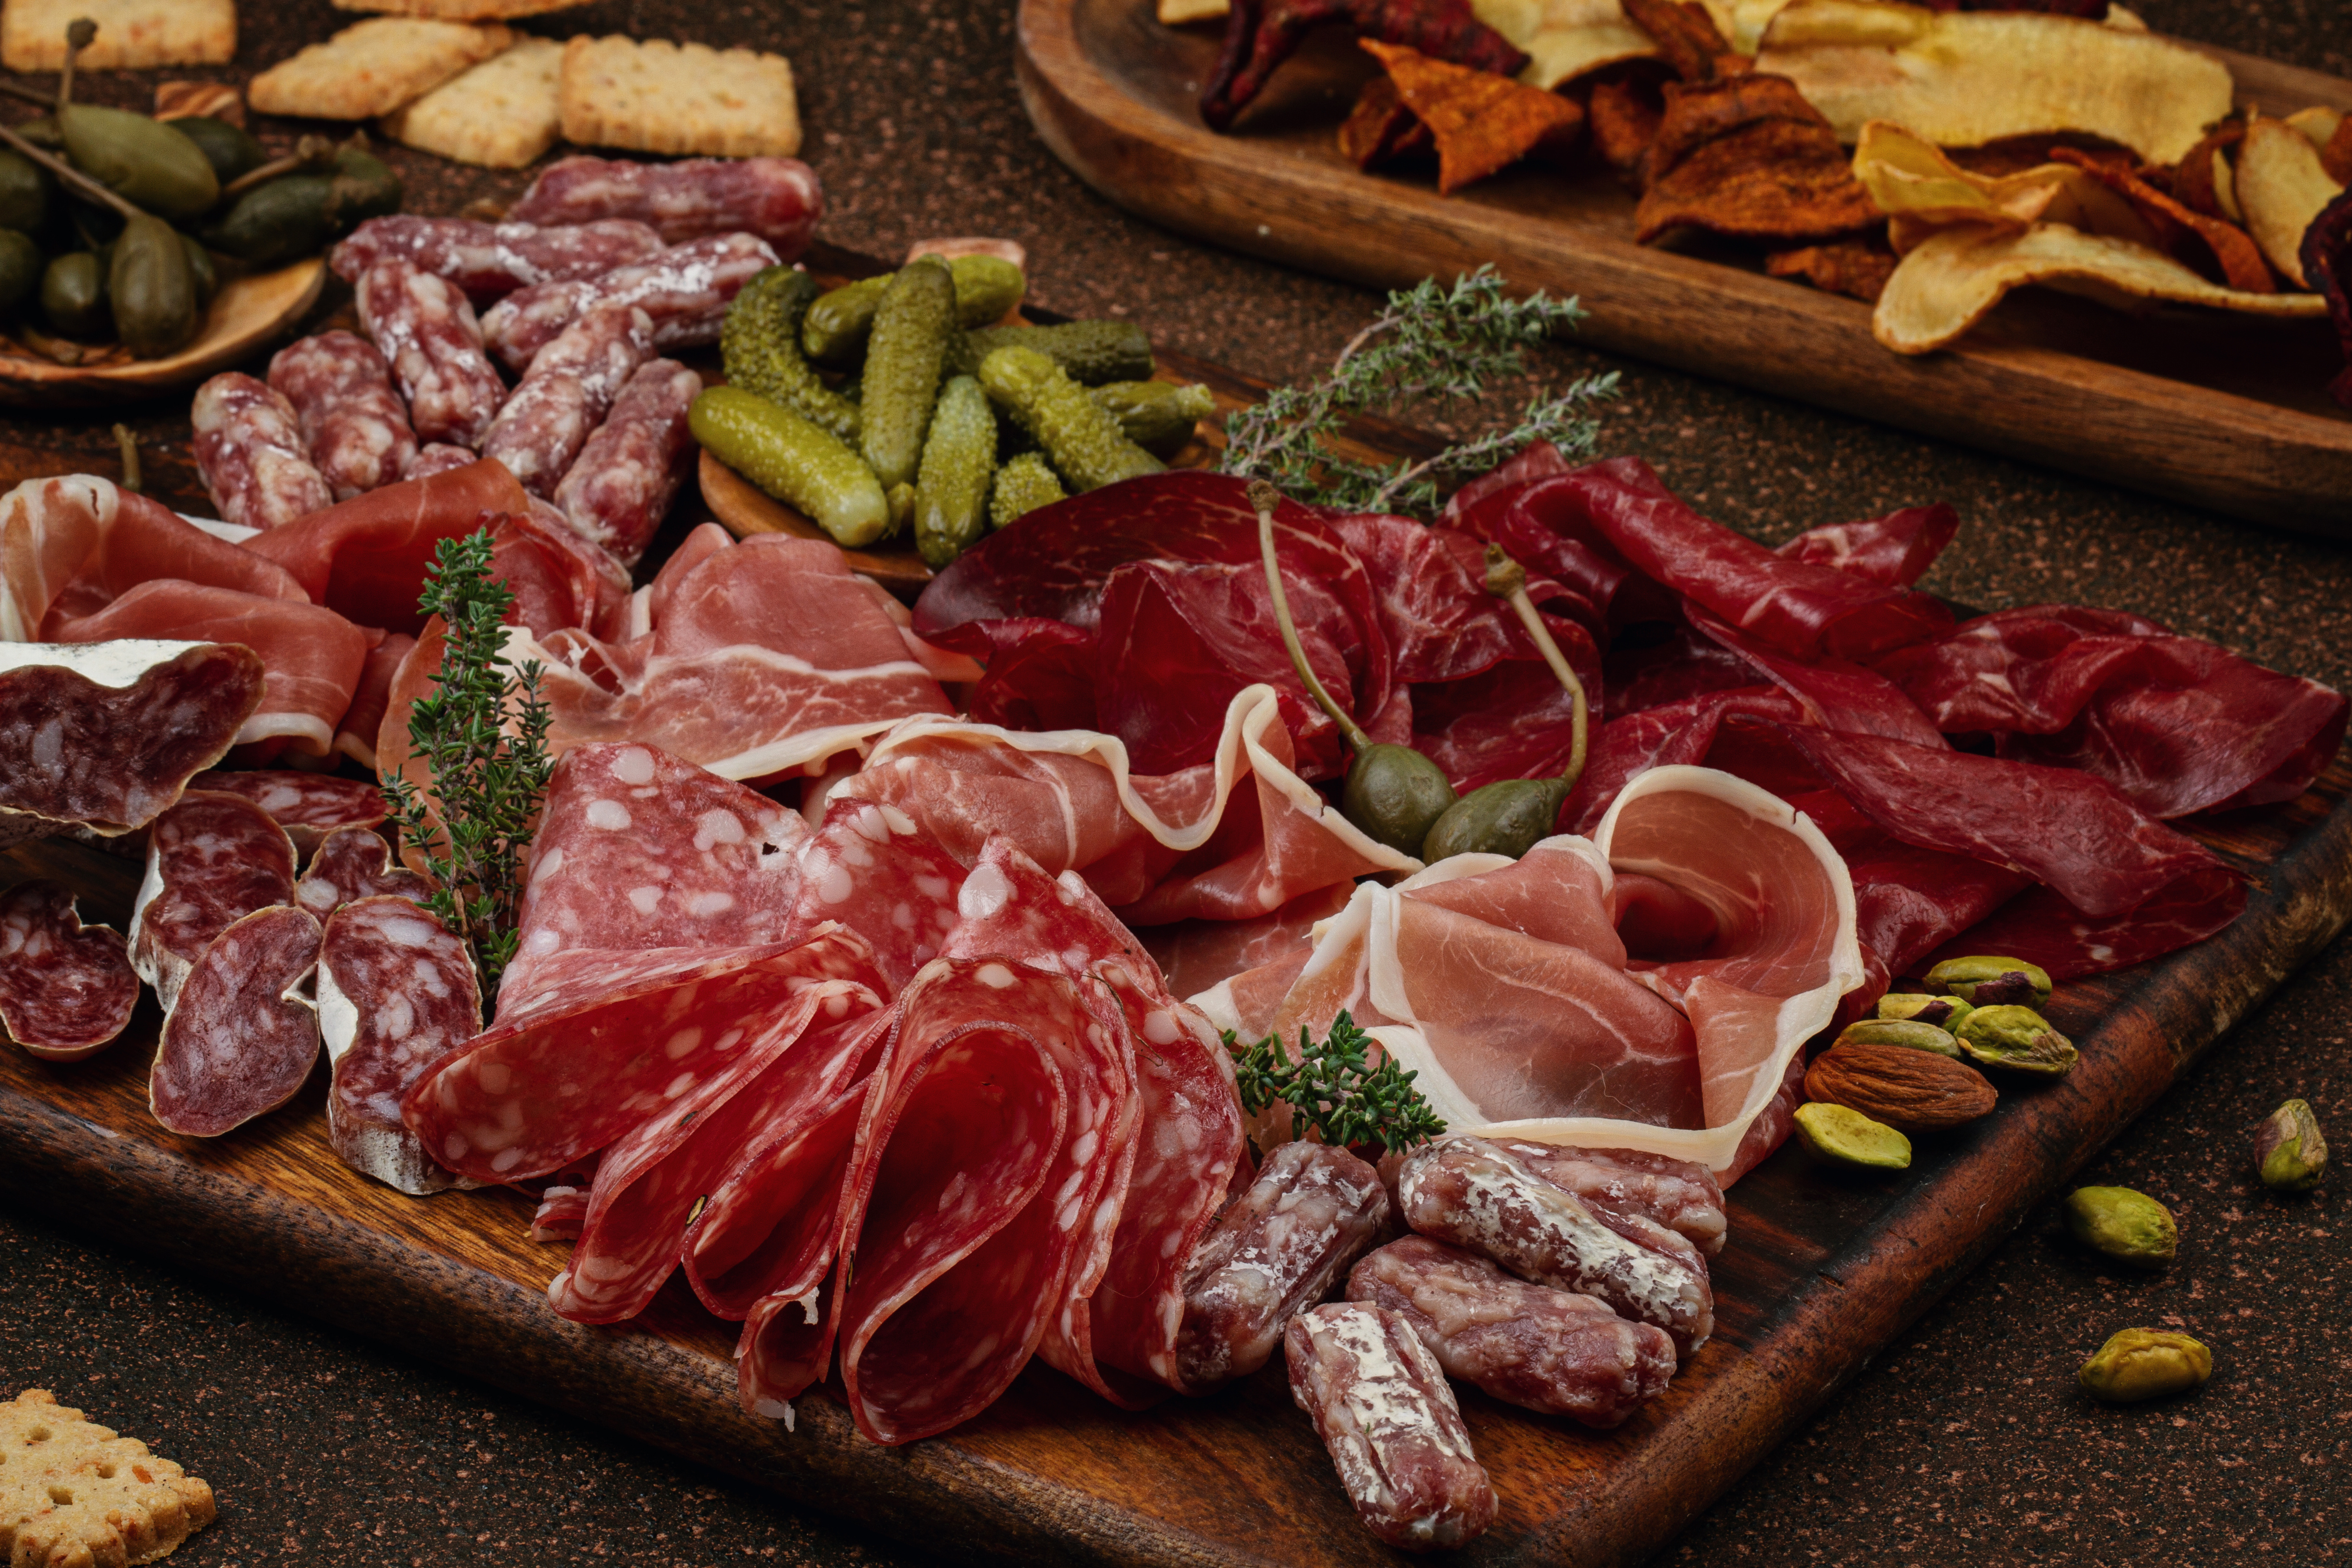 Viandes blanches, Charcuterie